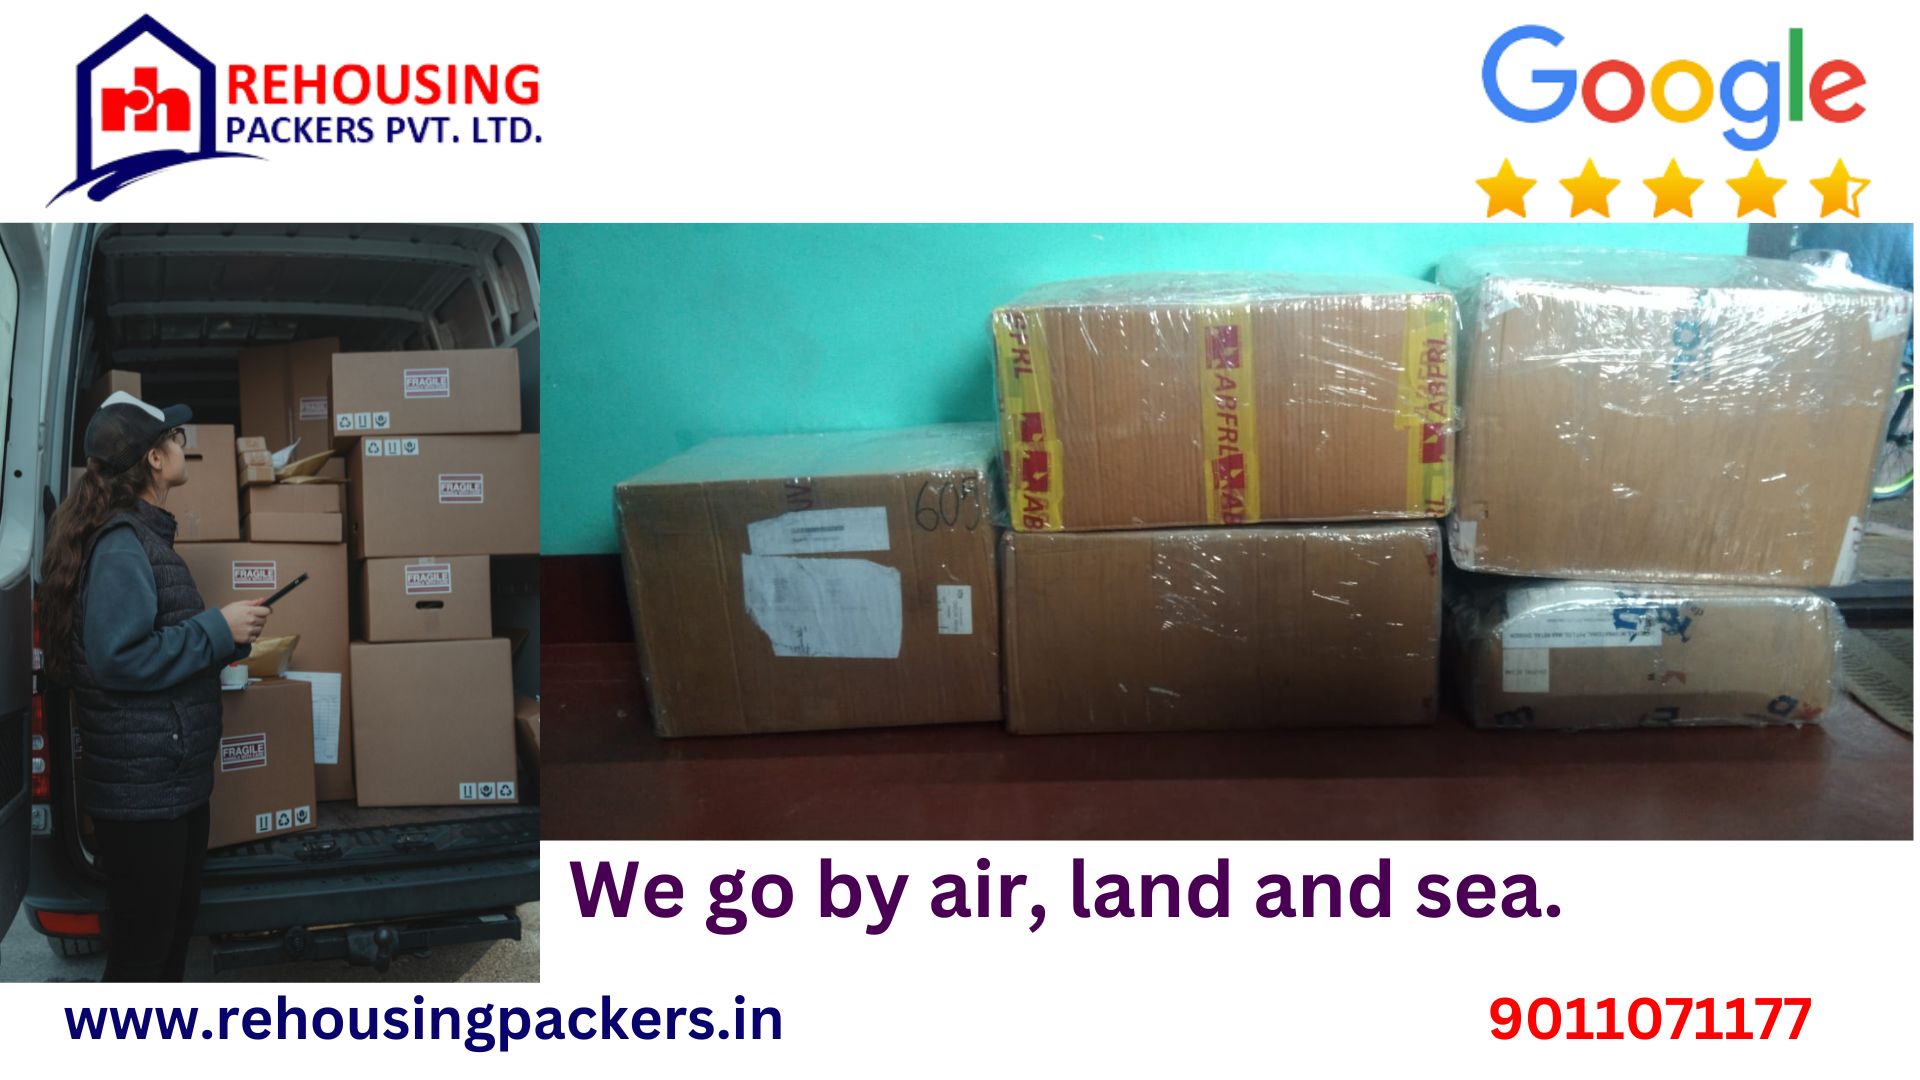 Packers and Movers from Delhi to Kerala